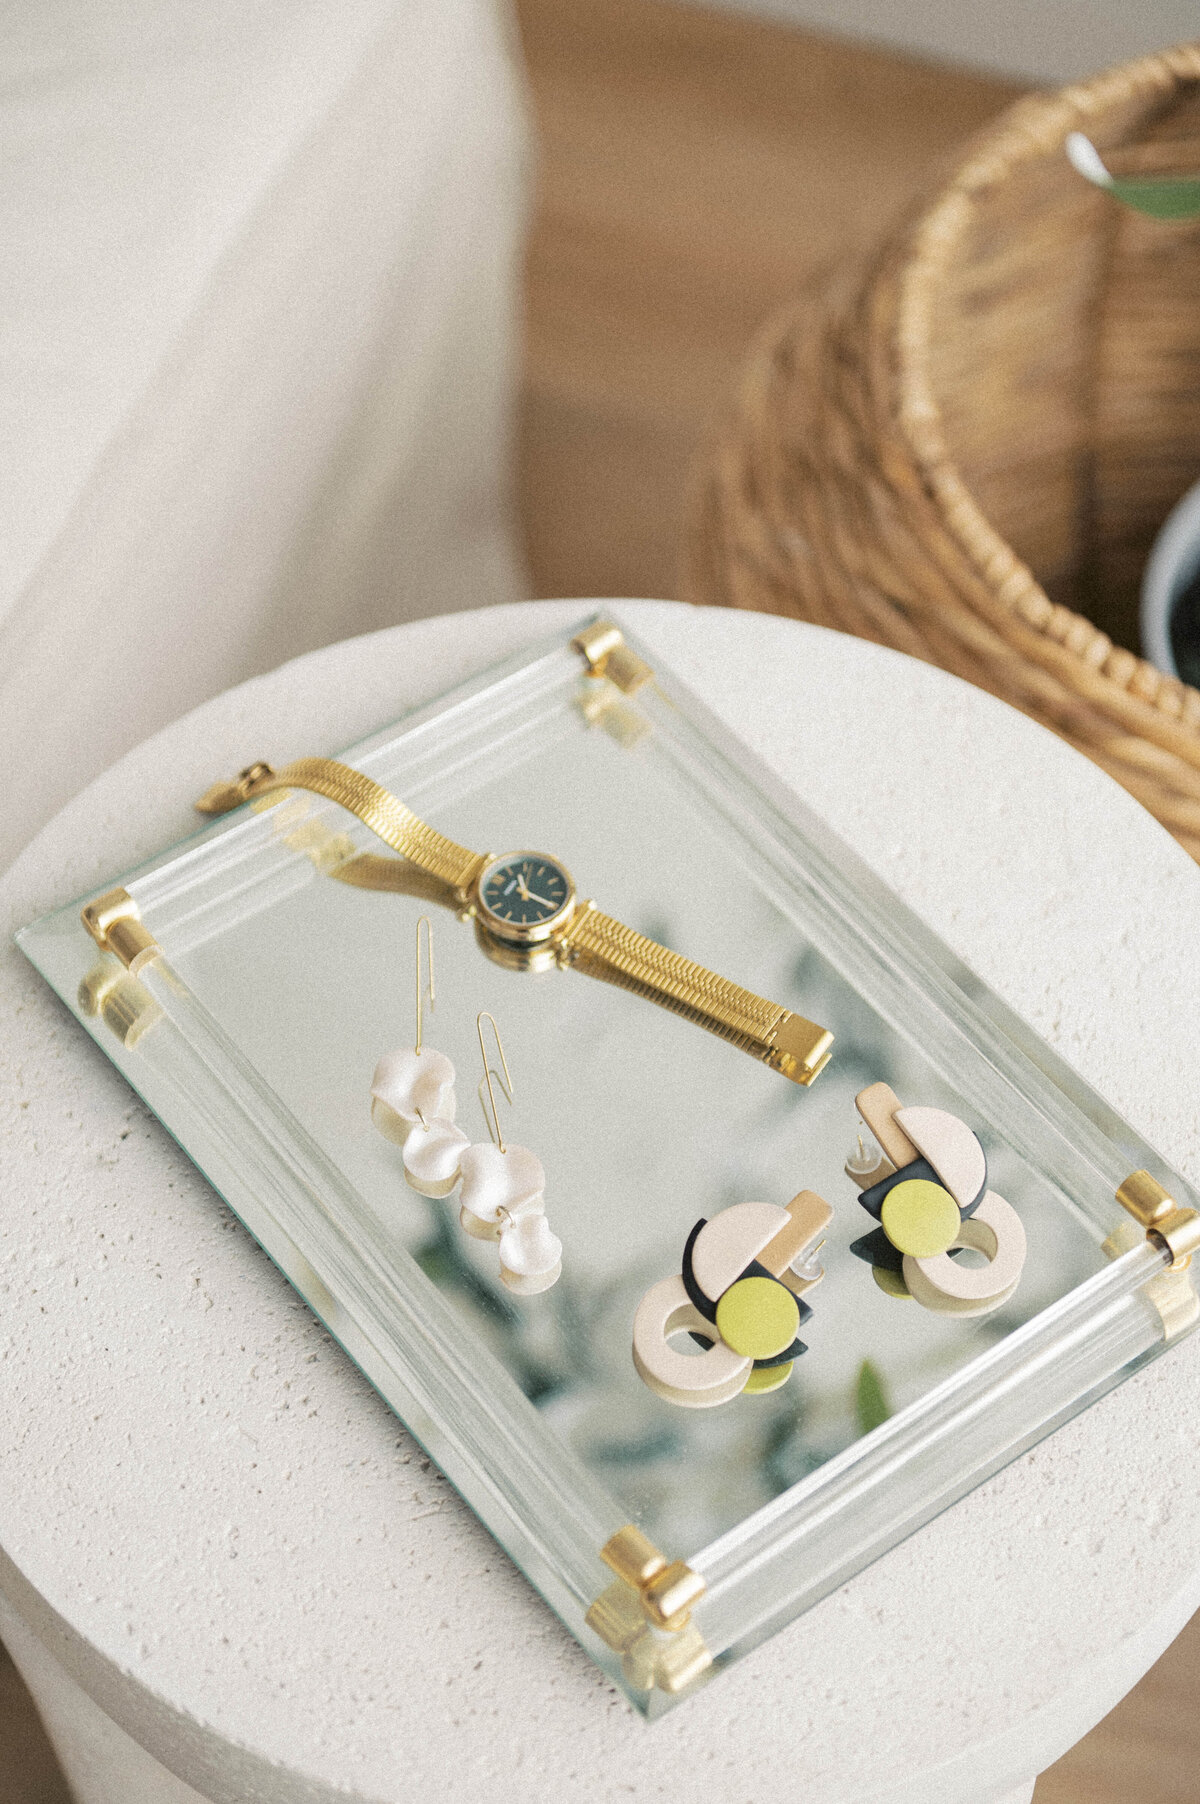 Gold watch and colourful earrings sitting on a mirrored tray